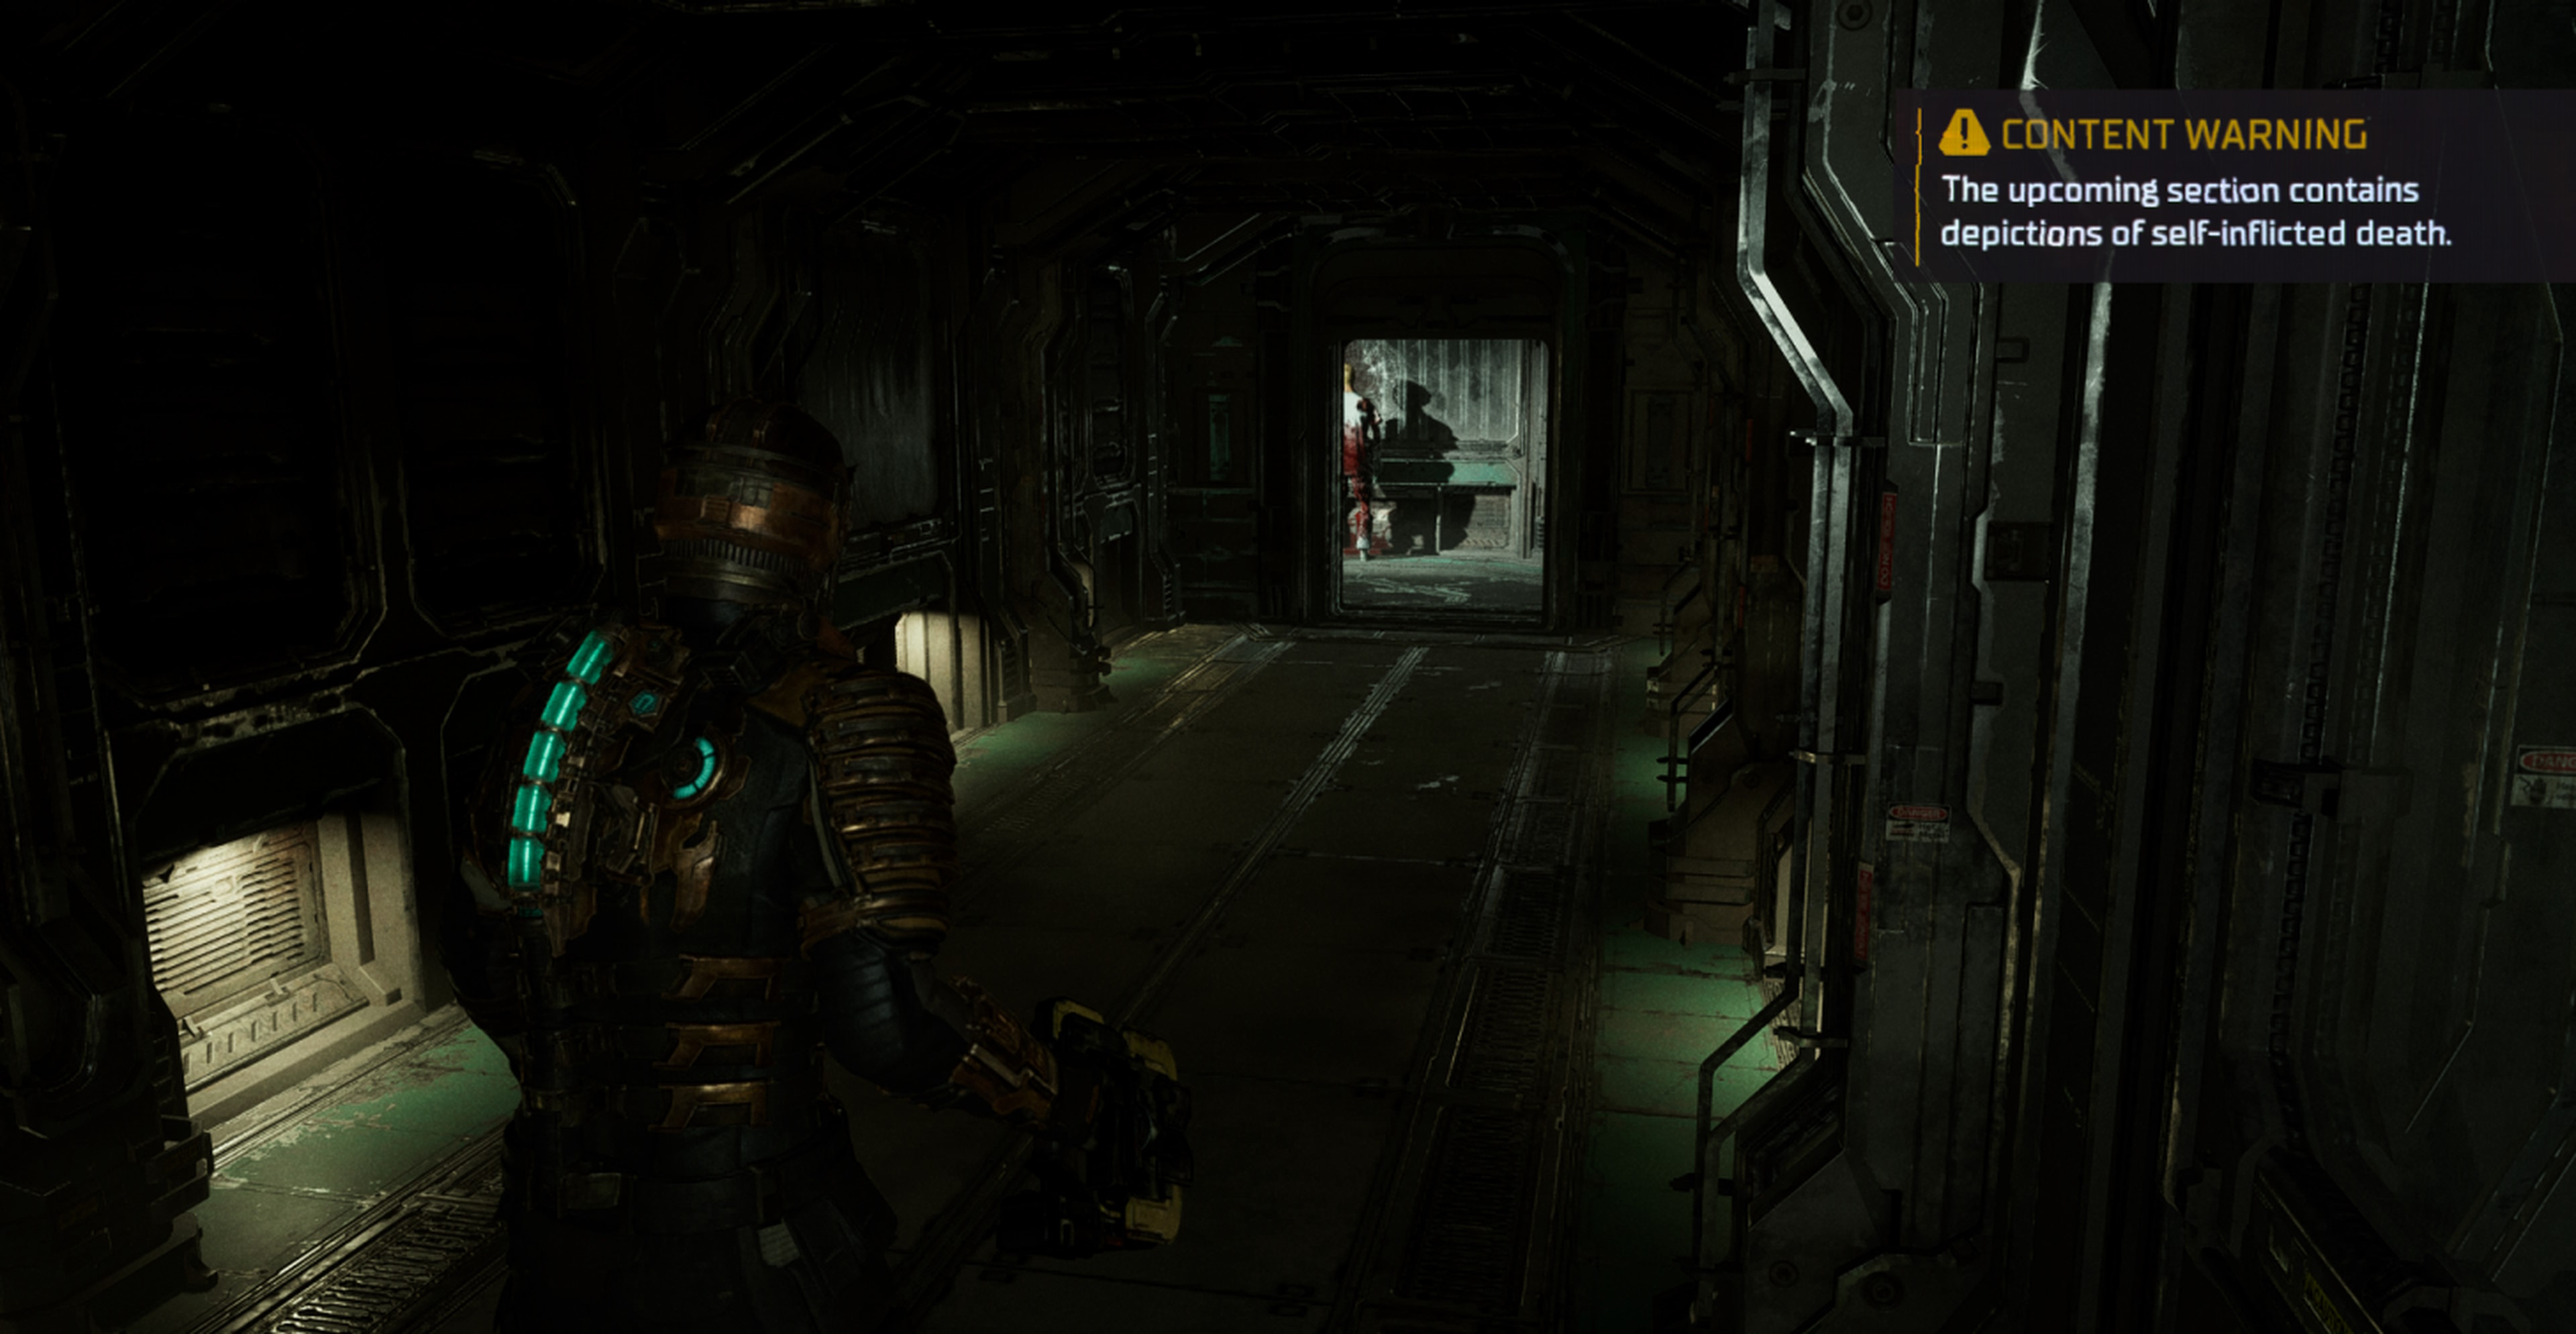 Dead Space Content Warning